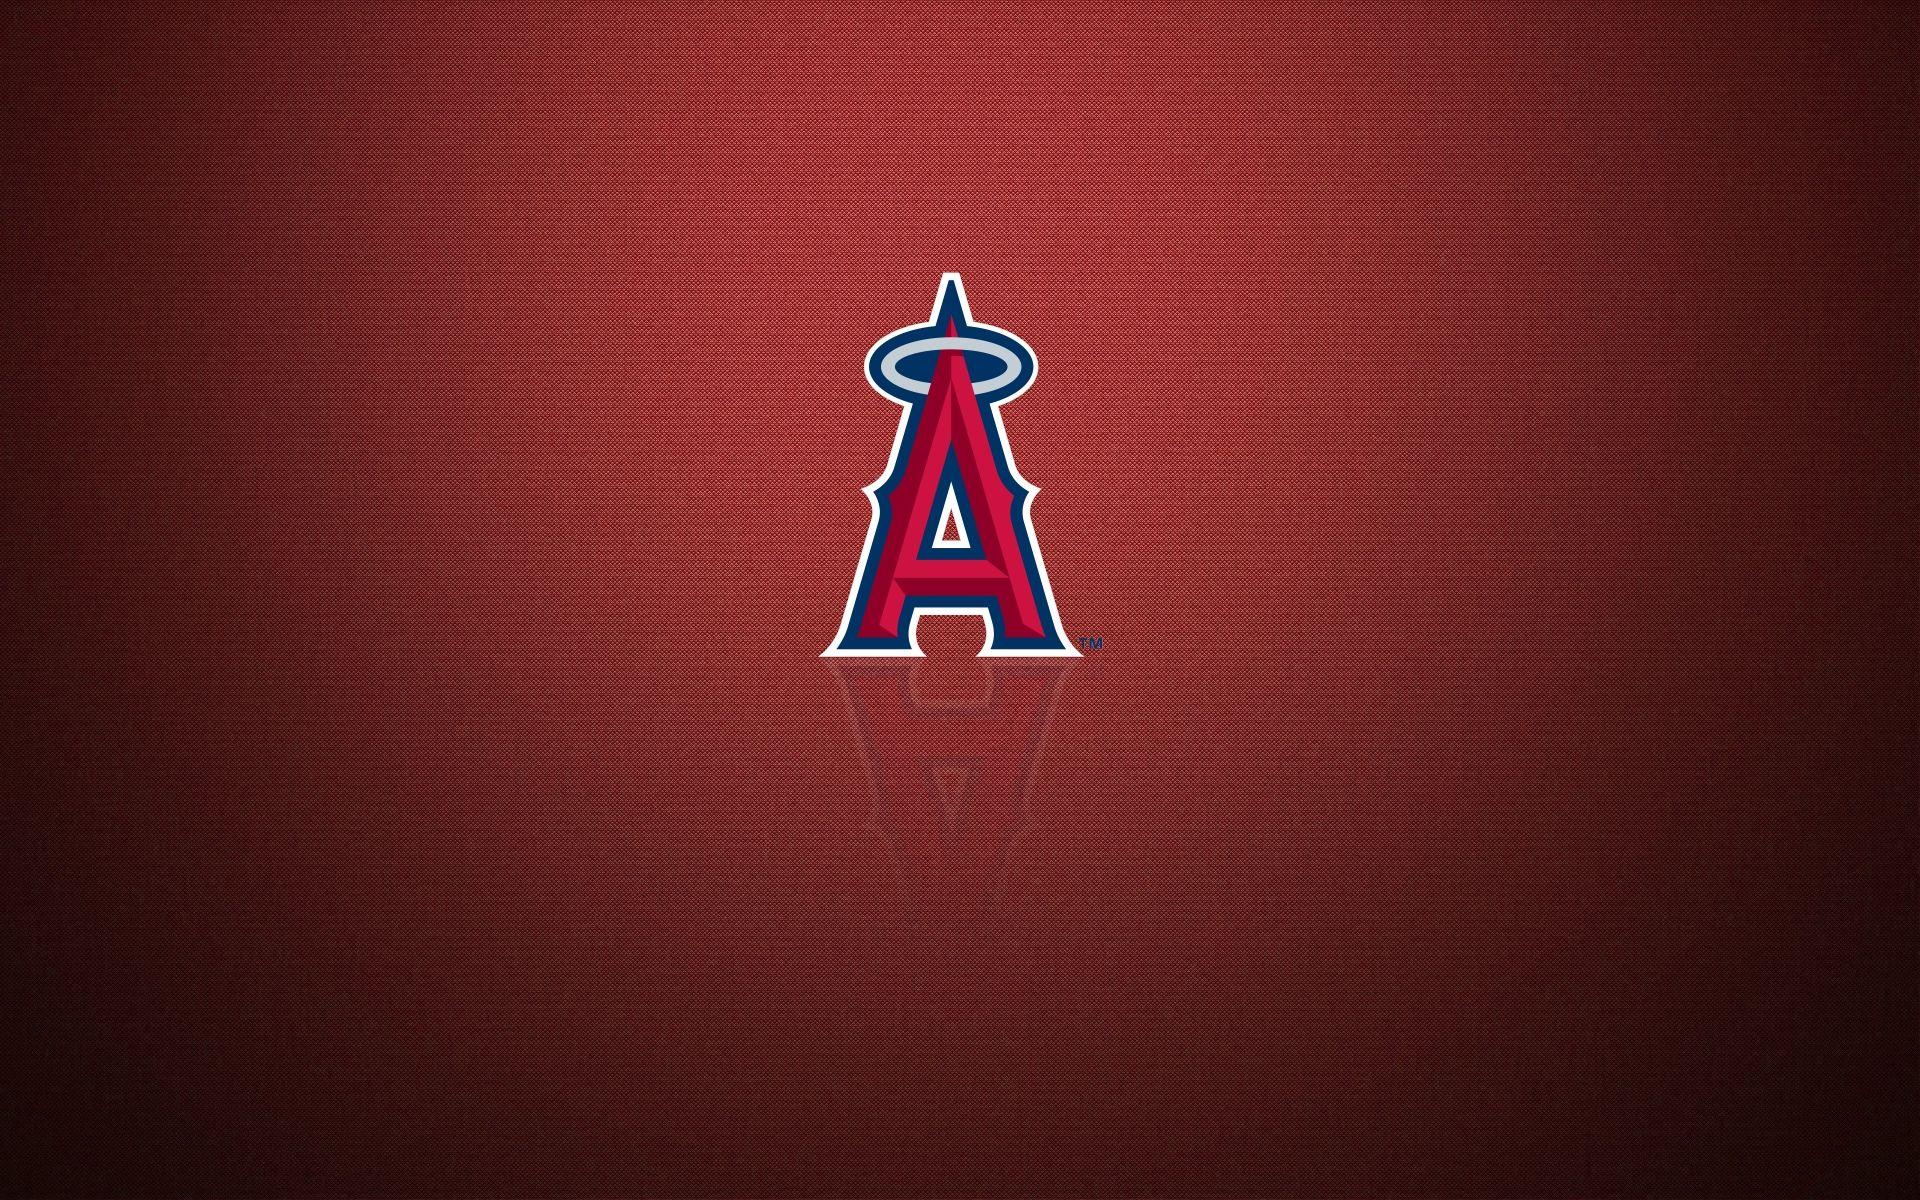 Los Angeles Angels wallpaper with logo